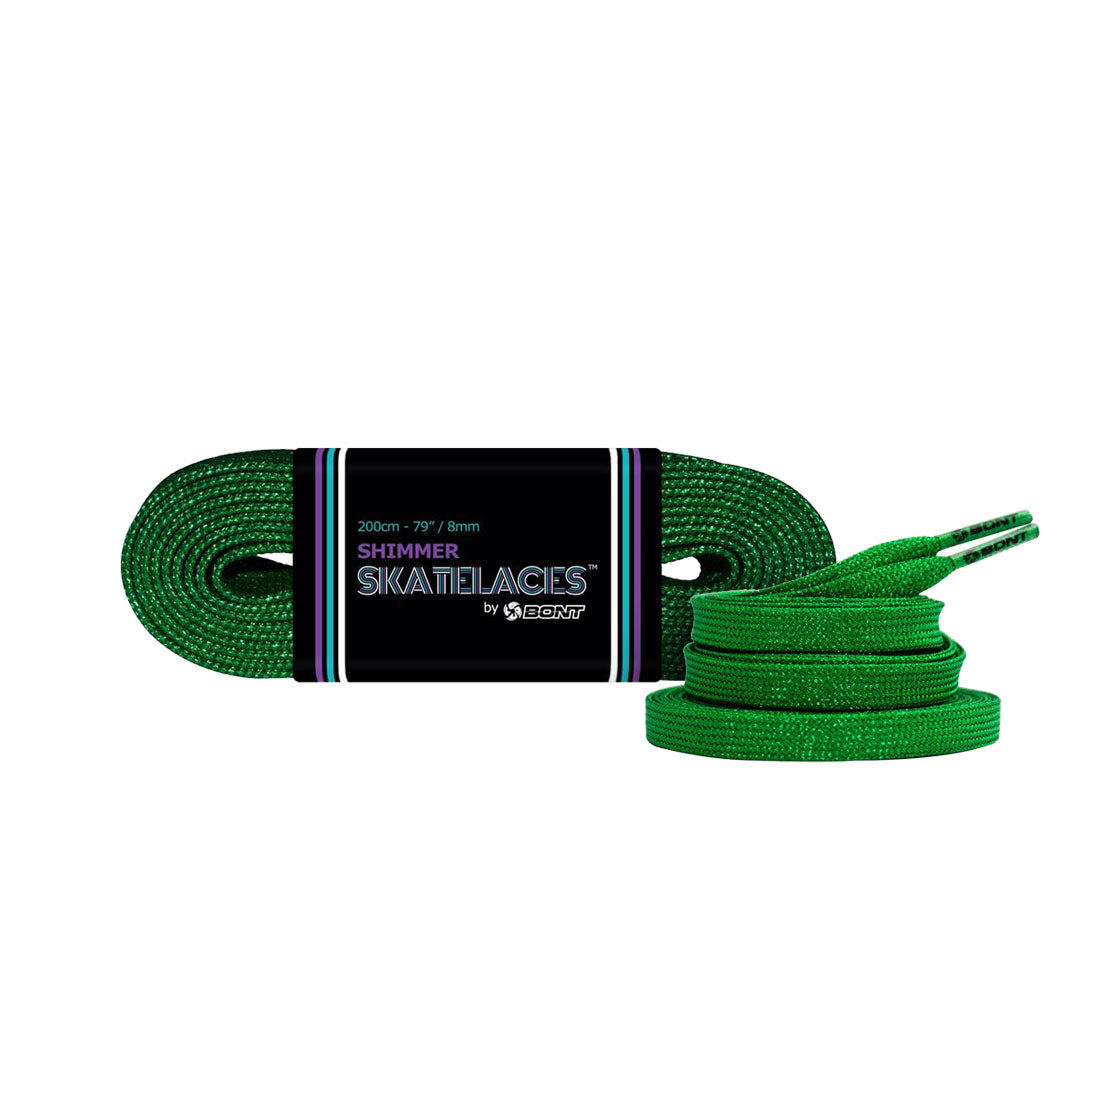 Bont Shimmer 8mm Laces - 200cm/79in Tinkerbell Green Laces